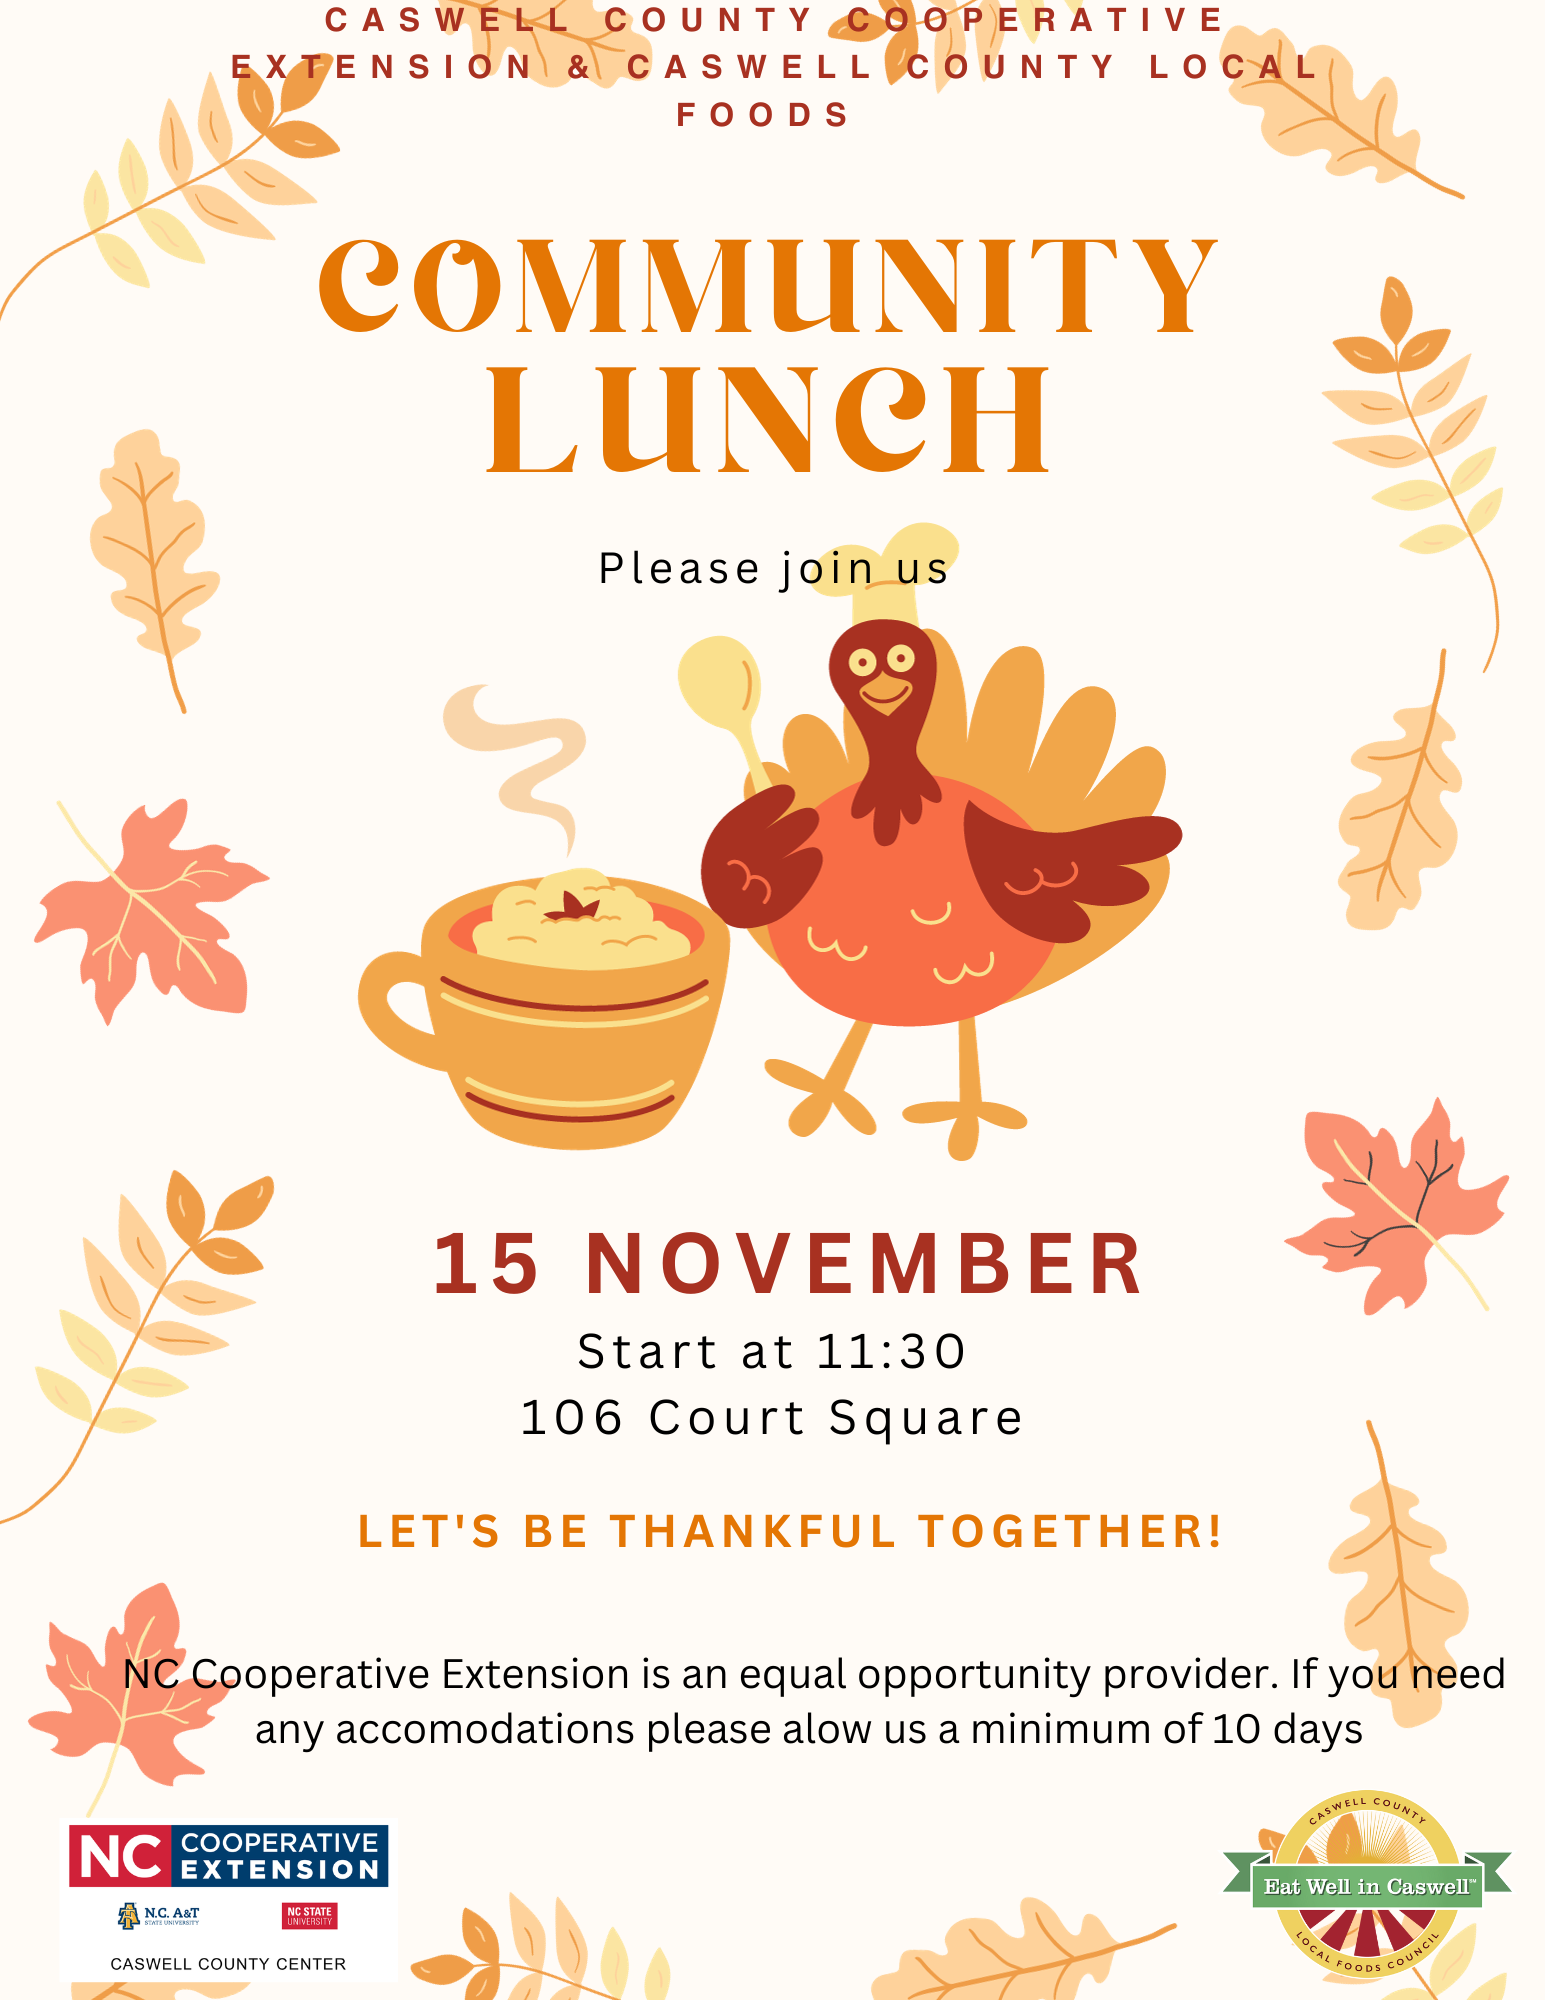 free lunch november 15th 11:30